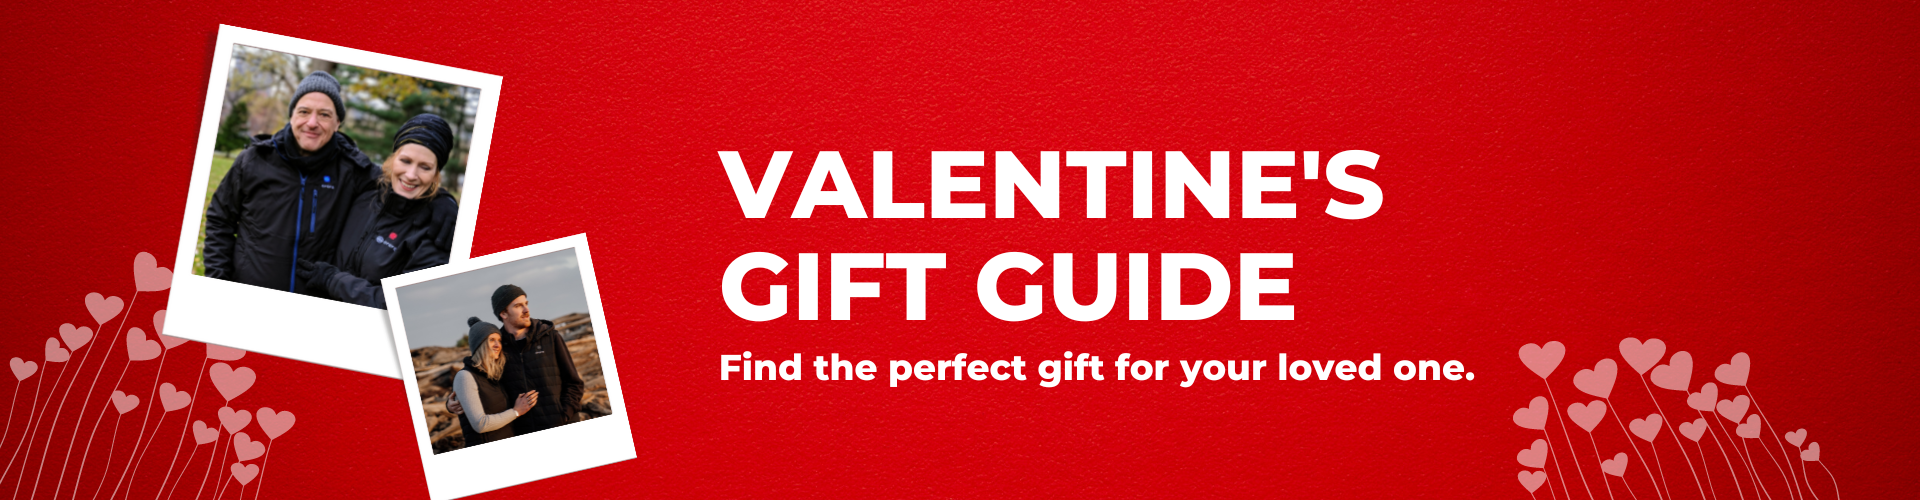 VALENTINE'SGIFT GUIDE. Find the perfect gift for your loved one.